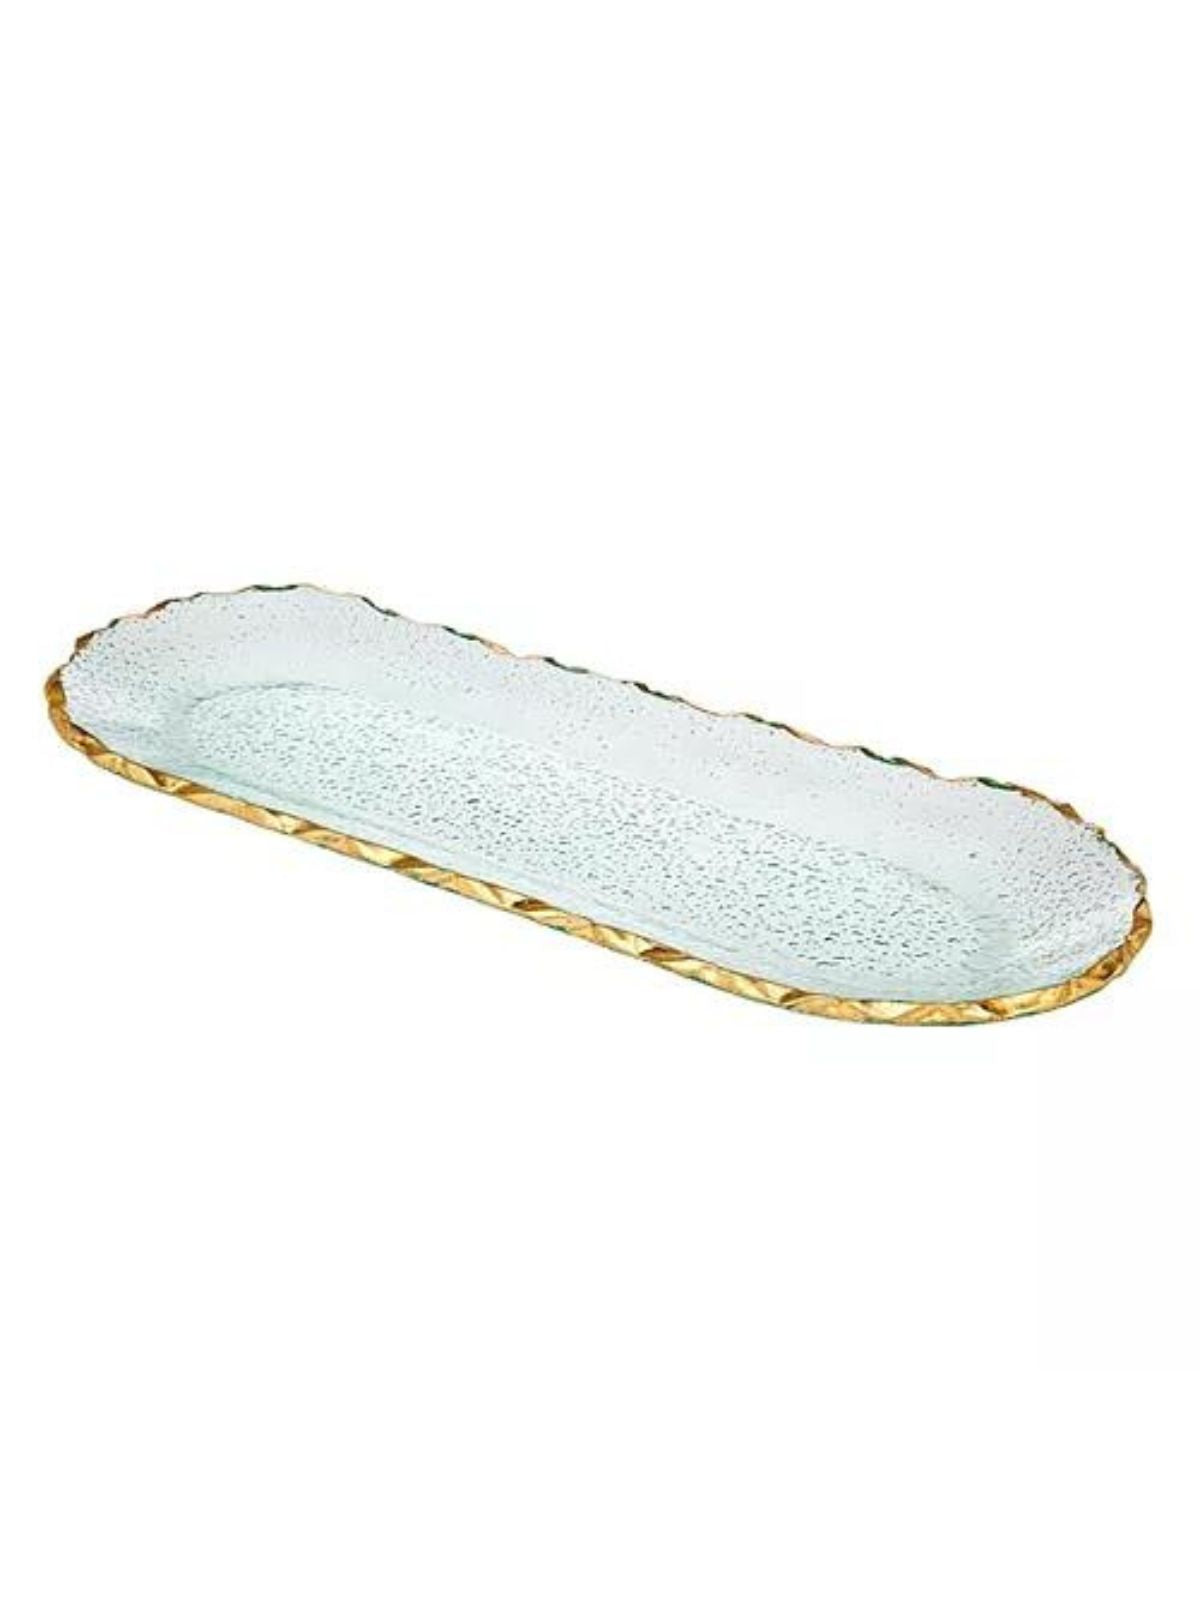 17.5 inch non leaded crystal glass oval serving tray with gold trim - KYA Home Decor